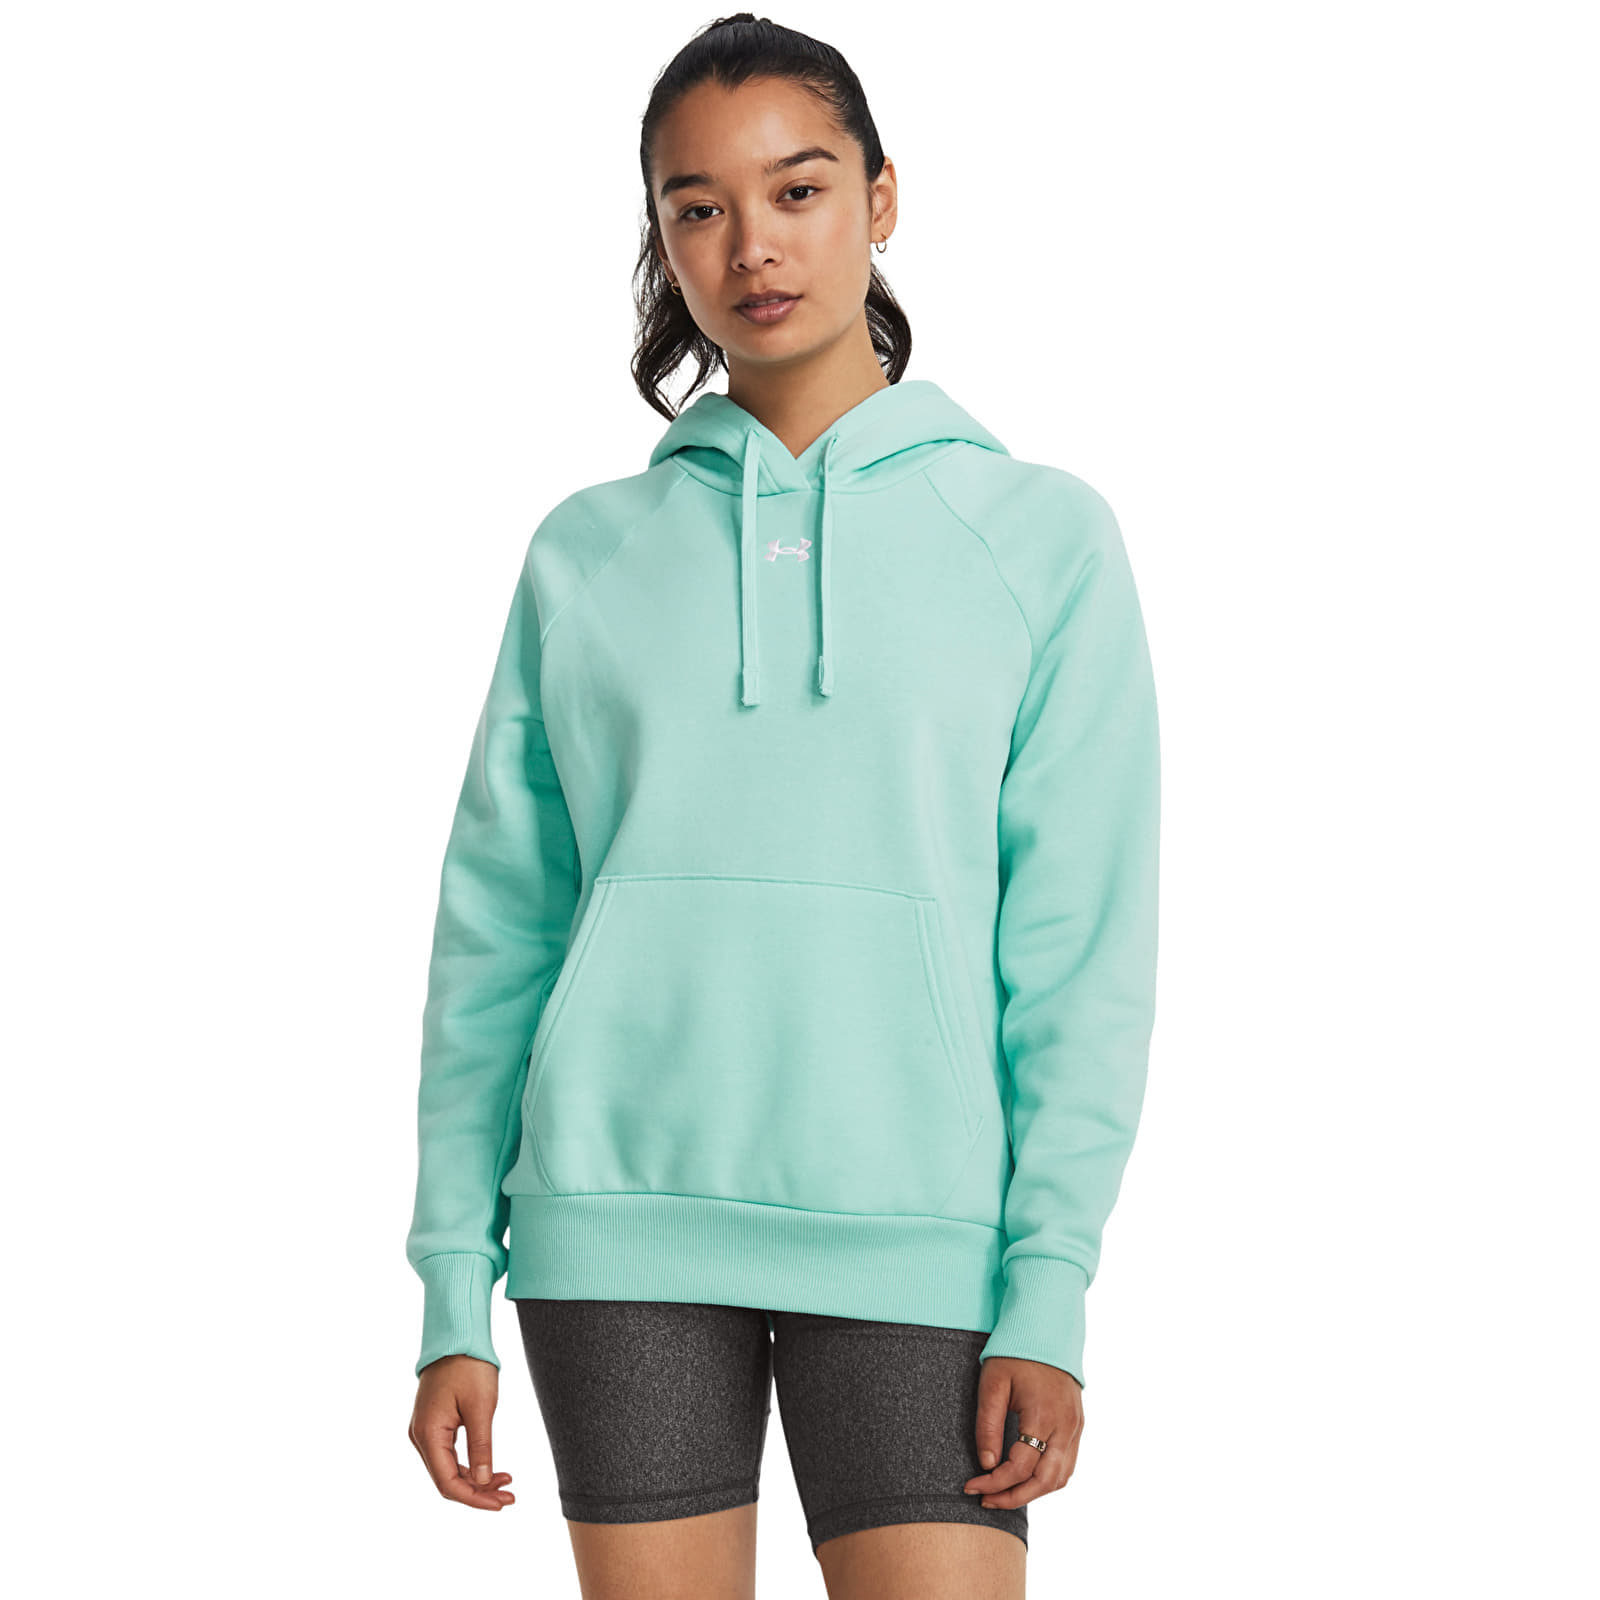 Under Armour Rival Fleece Hoodie Neo Turquoise